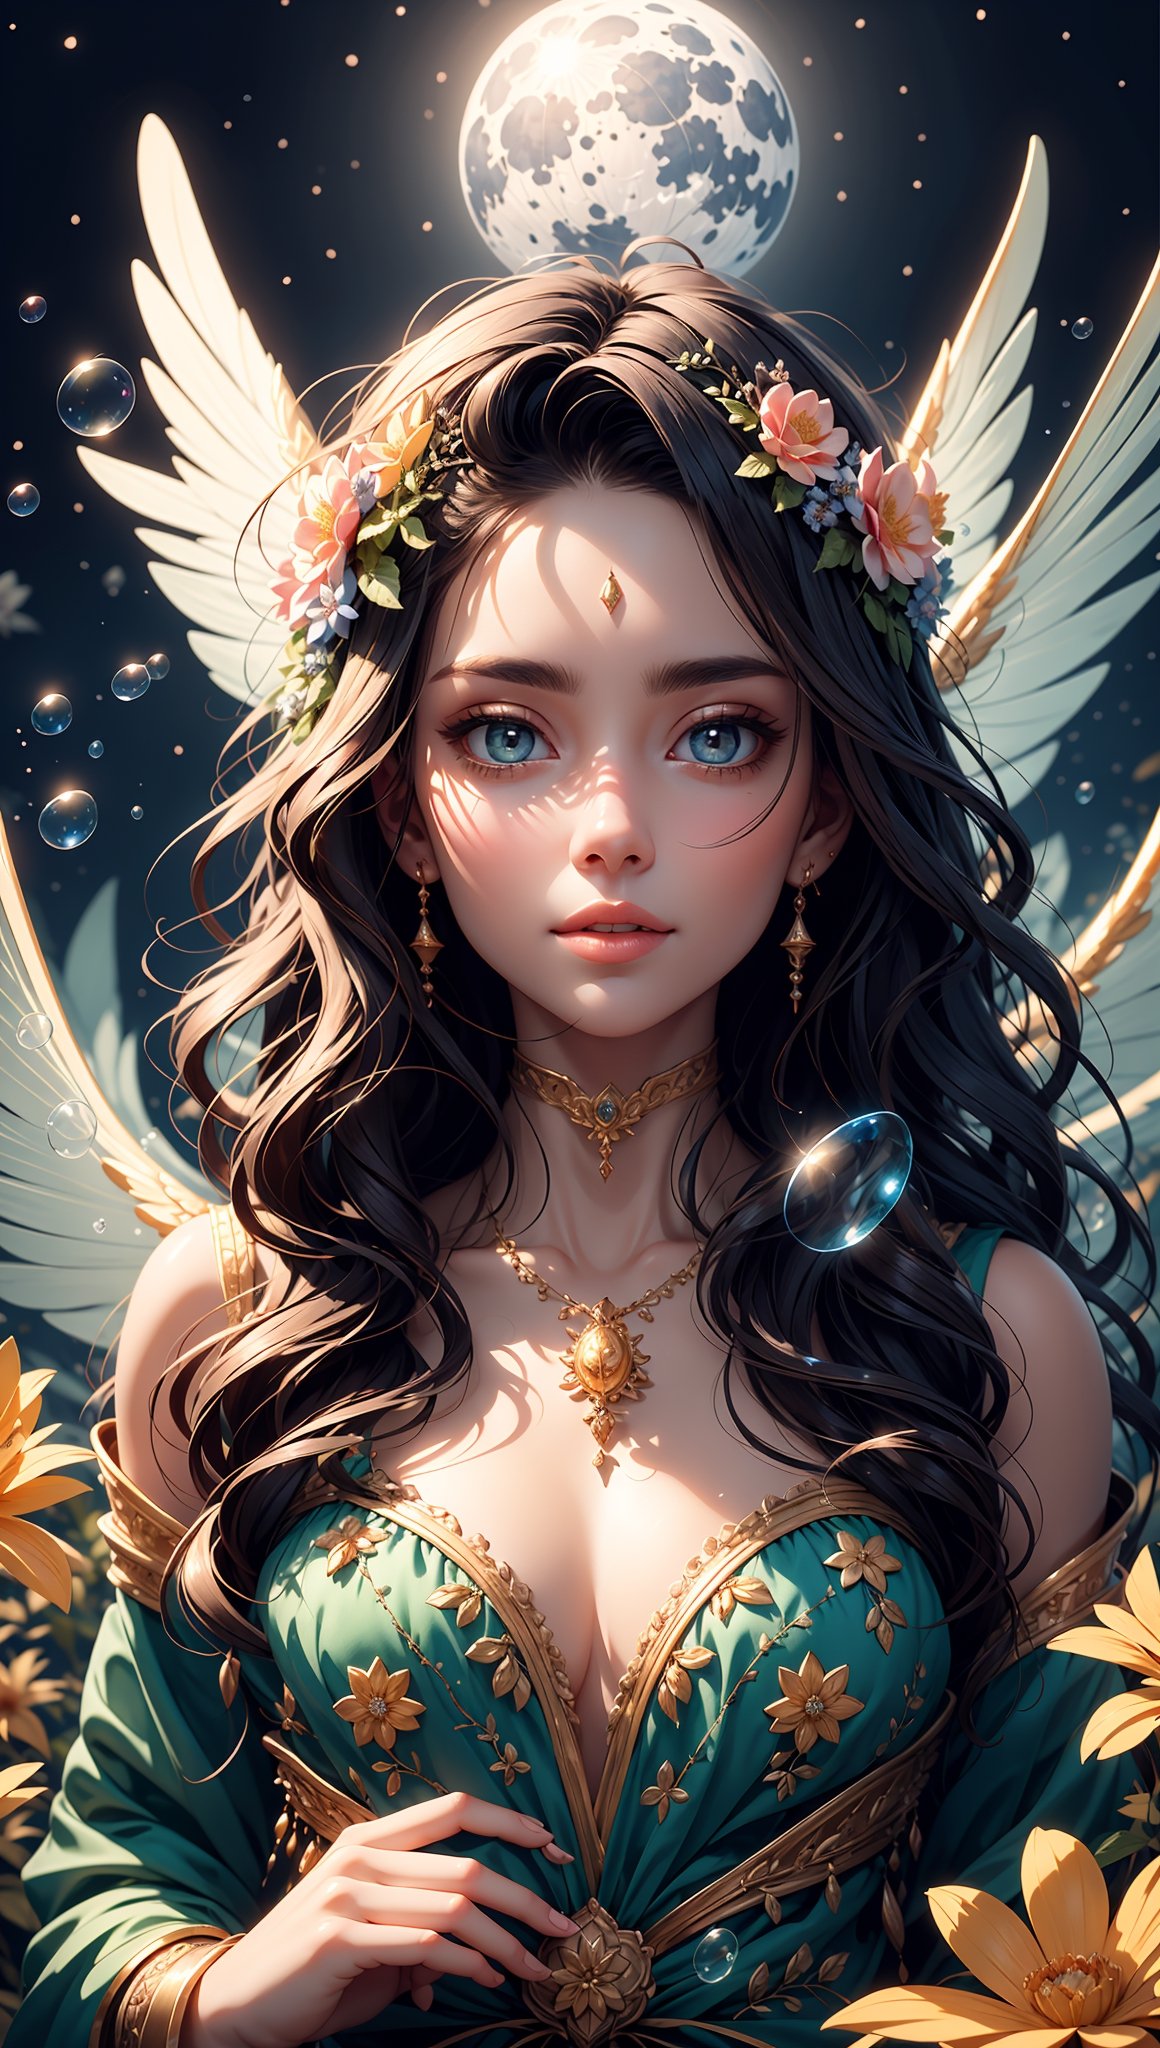 (high quality:1.2), (best quality:1.2), (masterpiece:1.2), official art, official wallpaper, surreal, beautifulgoddess, (woman:1.1), (long wavy hair:1.1), (flower crown:1.1), (celestial:1.2), (divine:1.2), (mystical creatures:1.1), (floating islands:1.1), (detailed landscape:1.1), (magic in the air:1.1), (stardust:1.1), night sky, (whimsical atmosphere:1.1), (dreamlike world:1.1), (bubbles:1.1), (luna moths:1.1), (moonlight:1.1), enchanted forest, (wisdom:1.1), (powerful energy:1.1), (guardian angels:1.1), (creation:1.2), (peaceful:1.1), vibrant colors, HDR, (detailed:1.05), (extremely detailed:1.06), sharp focus, (intricate:1.03), (extremely intricate:1.04), (epic scenery:1.09), vibrant colors, (beautiful scenery:1.08), (detailed scenery:1.08), (intricate scenery:1.07), (wonderful scenery:1.05), beautiful face, (perfect eyes:0.8), (perfect skin:0.8), (detailed face:0.8), (detailed eyes:0.8), (detailed hair:0.8), (detailed lips:0.8),Color Booster,perfect light,Sexy Women 